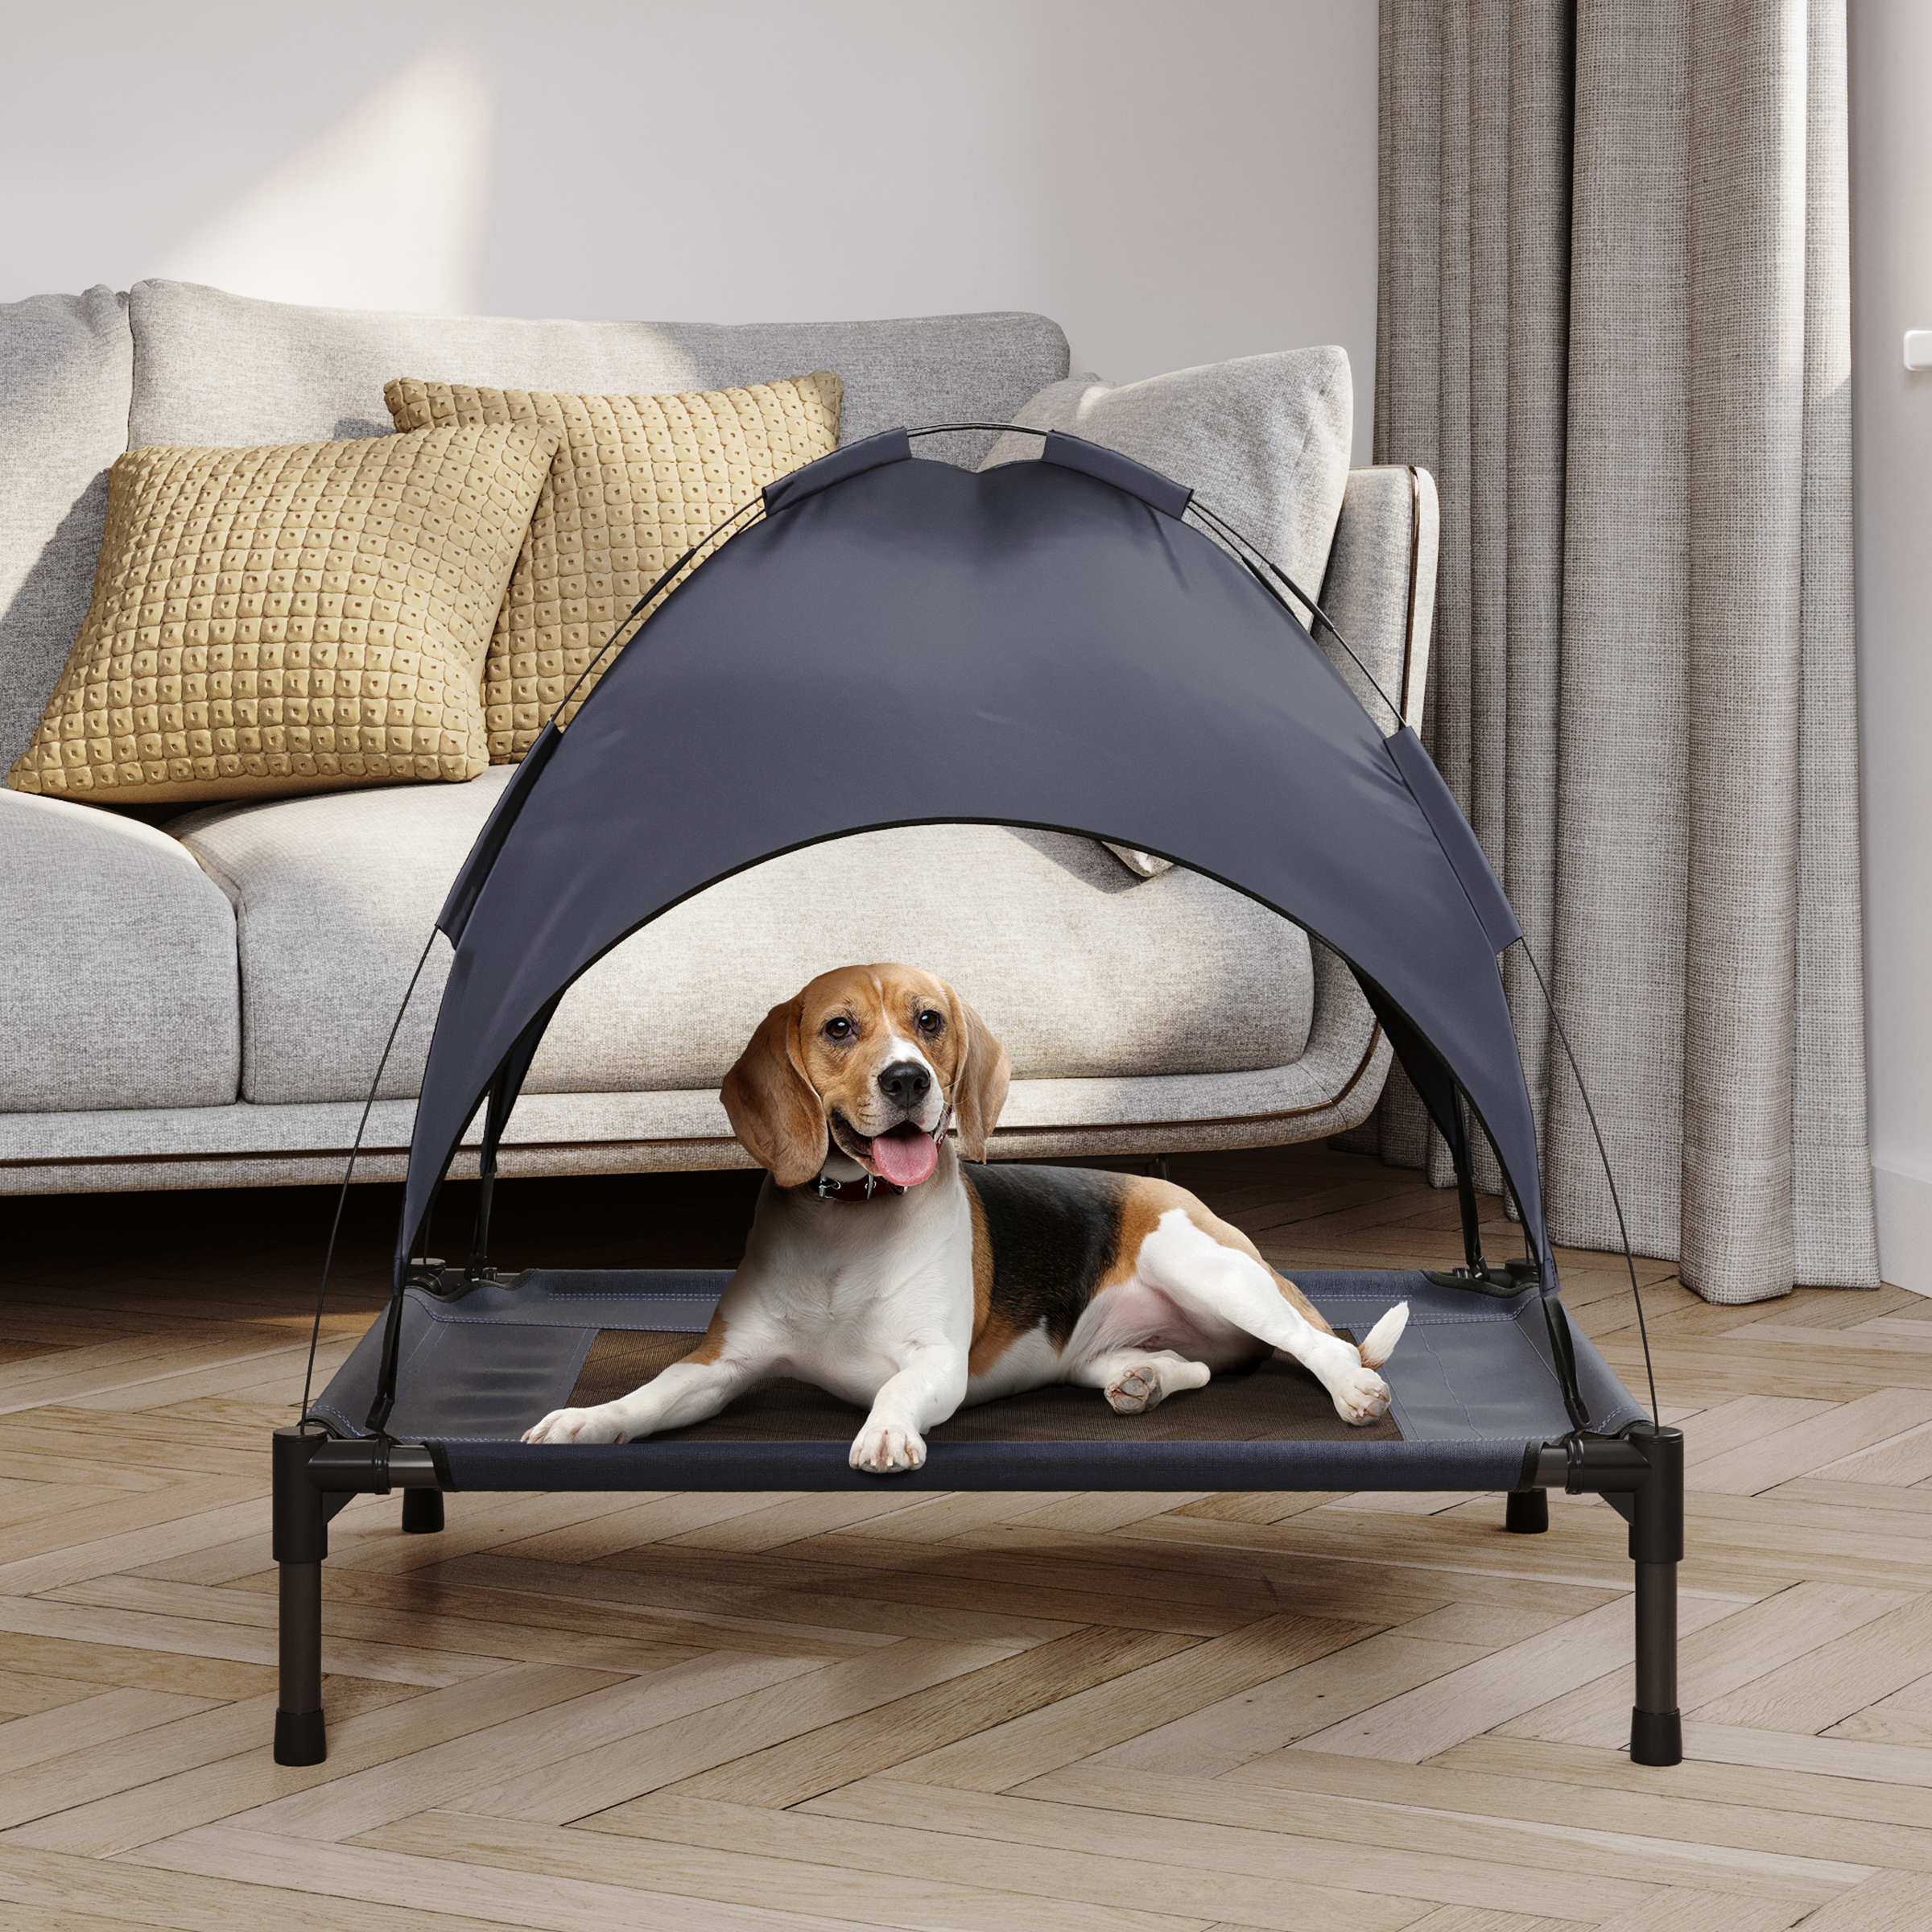 Elevated Dog Bed With Canopy - 30x24-Inch Portable Pet Bed With Non-Slip Feet - Indoor/Outdoor Dog Cot With Carrying Case By PETMAKER (Blue)